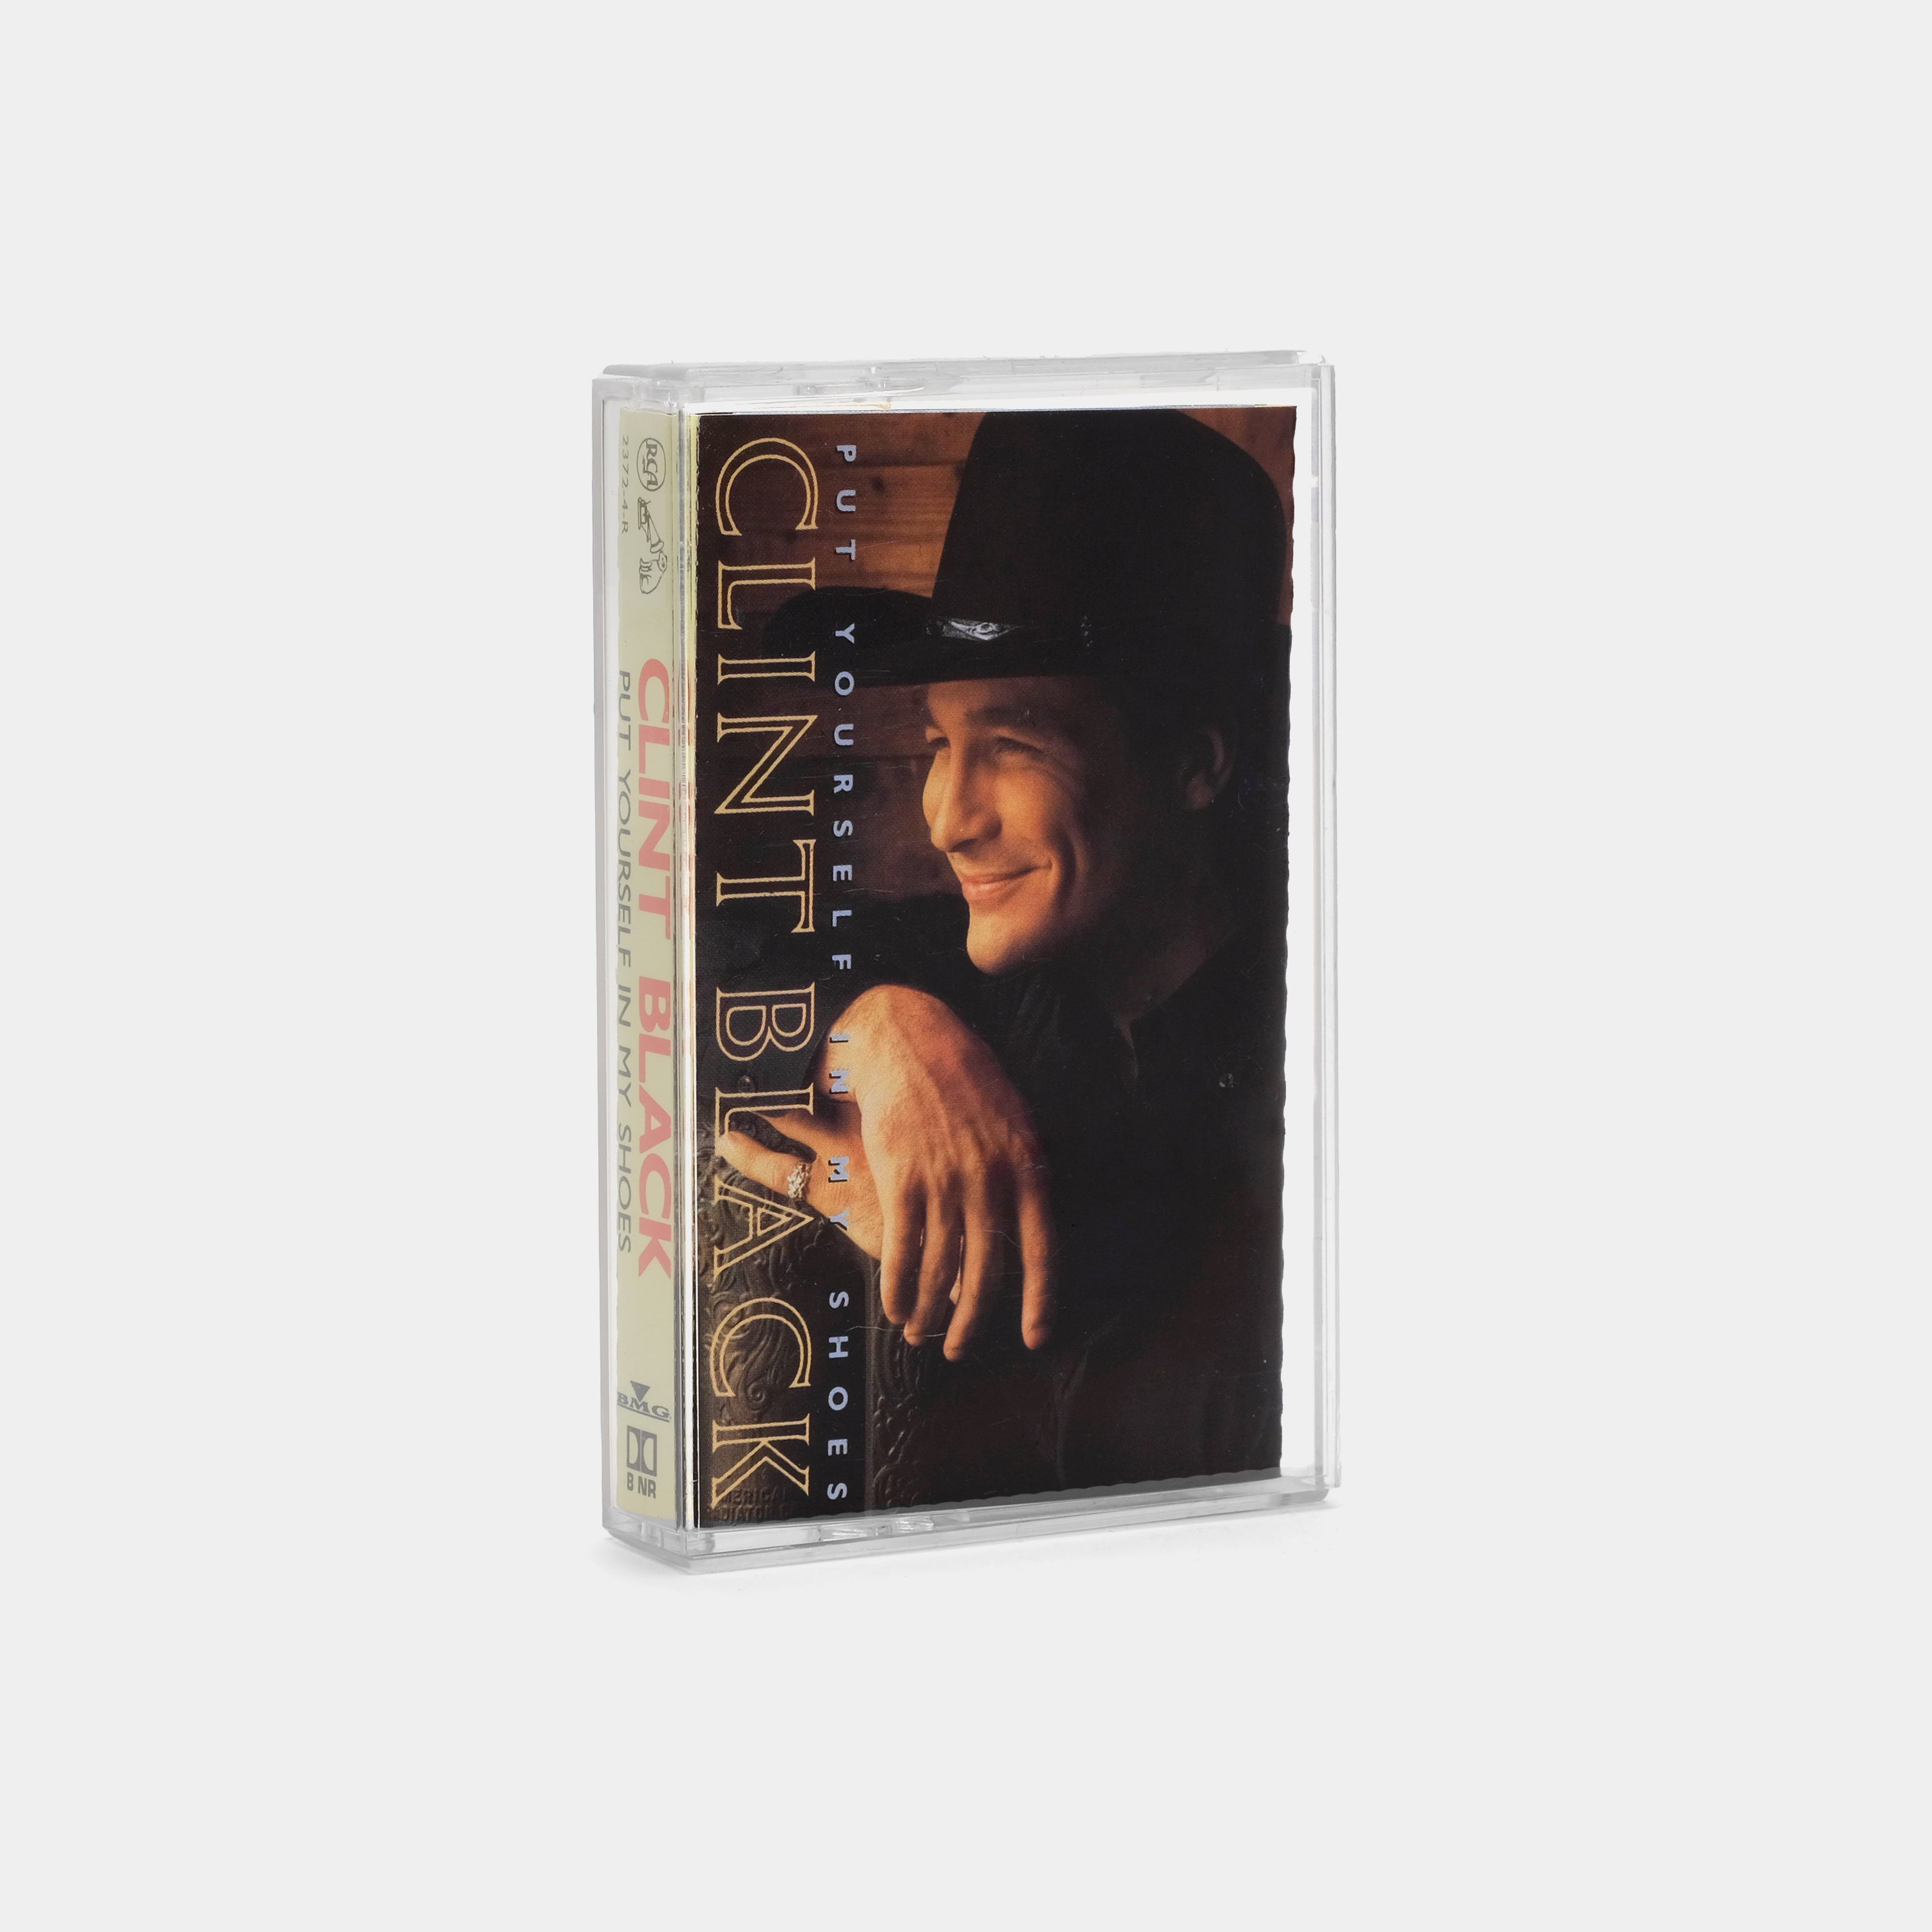 Clint Black - Put Yourself In My Shoes Cassette Tape